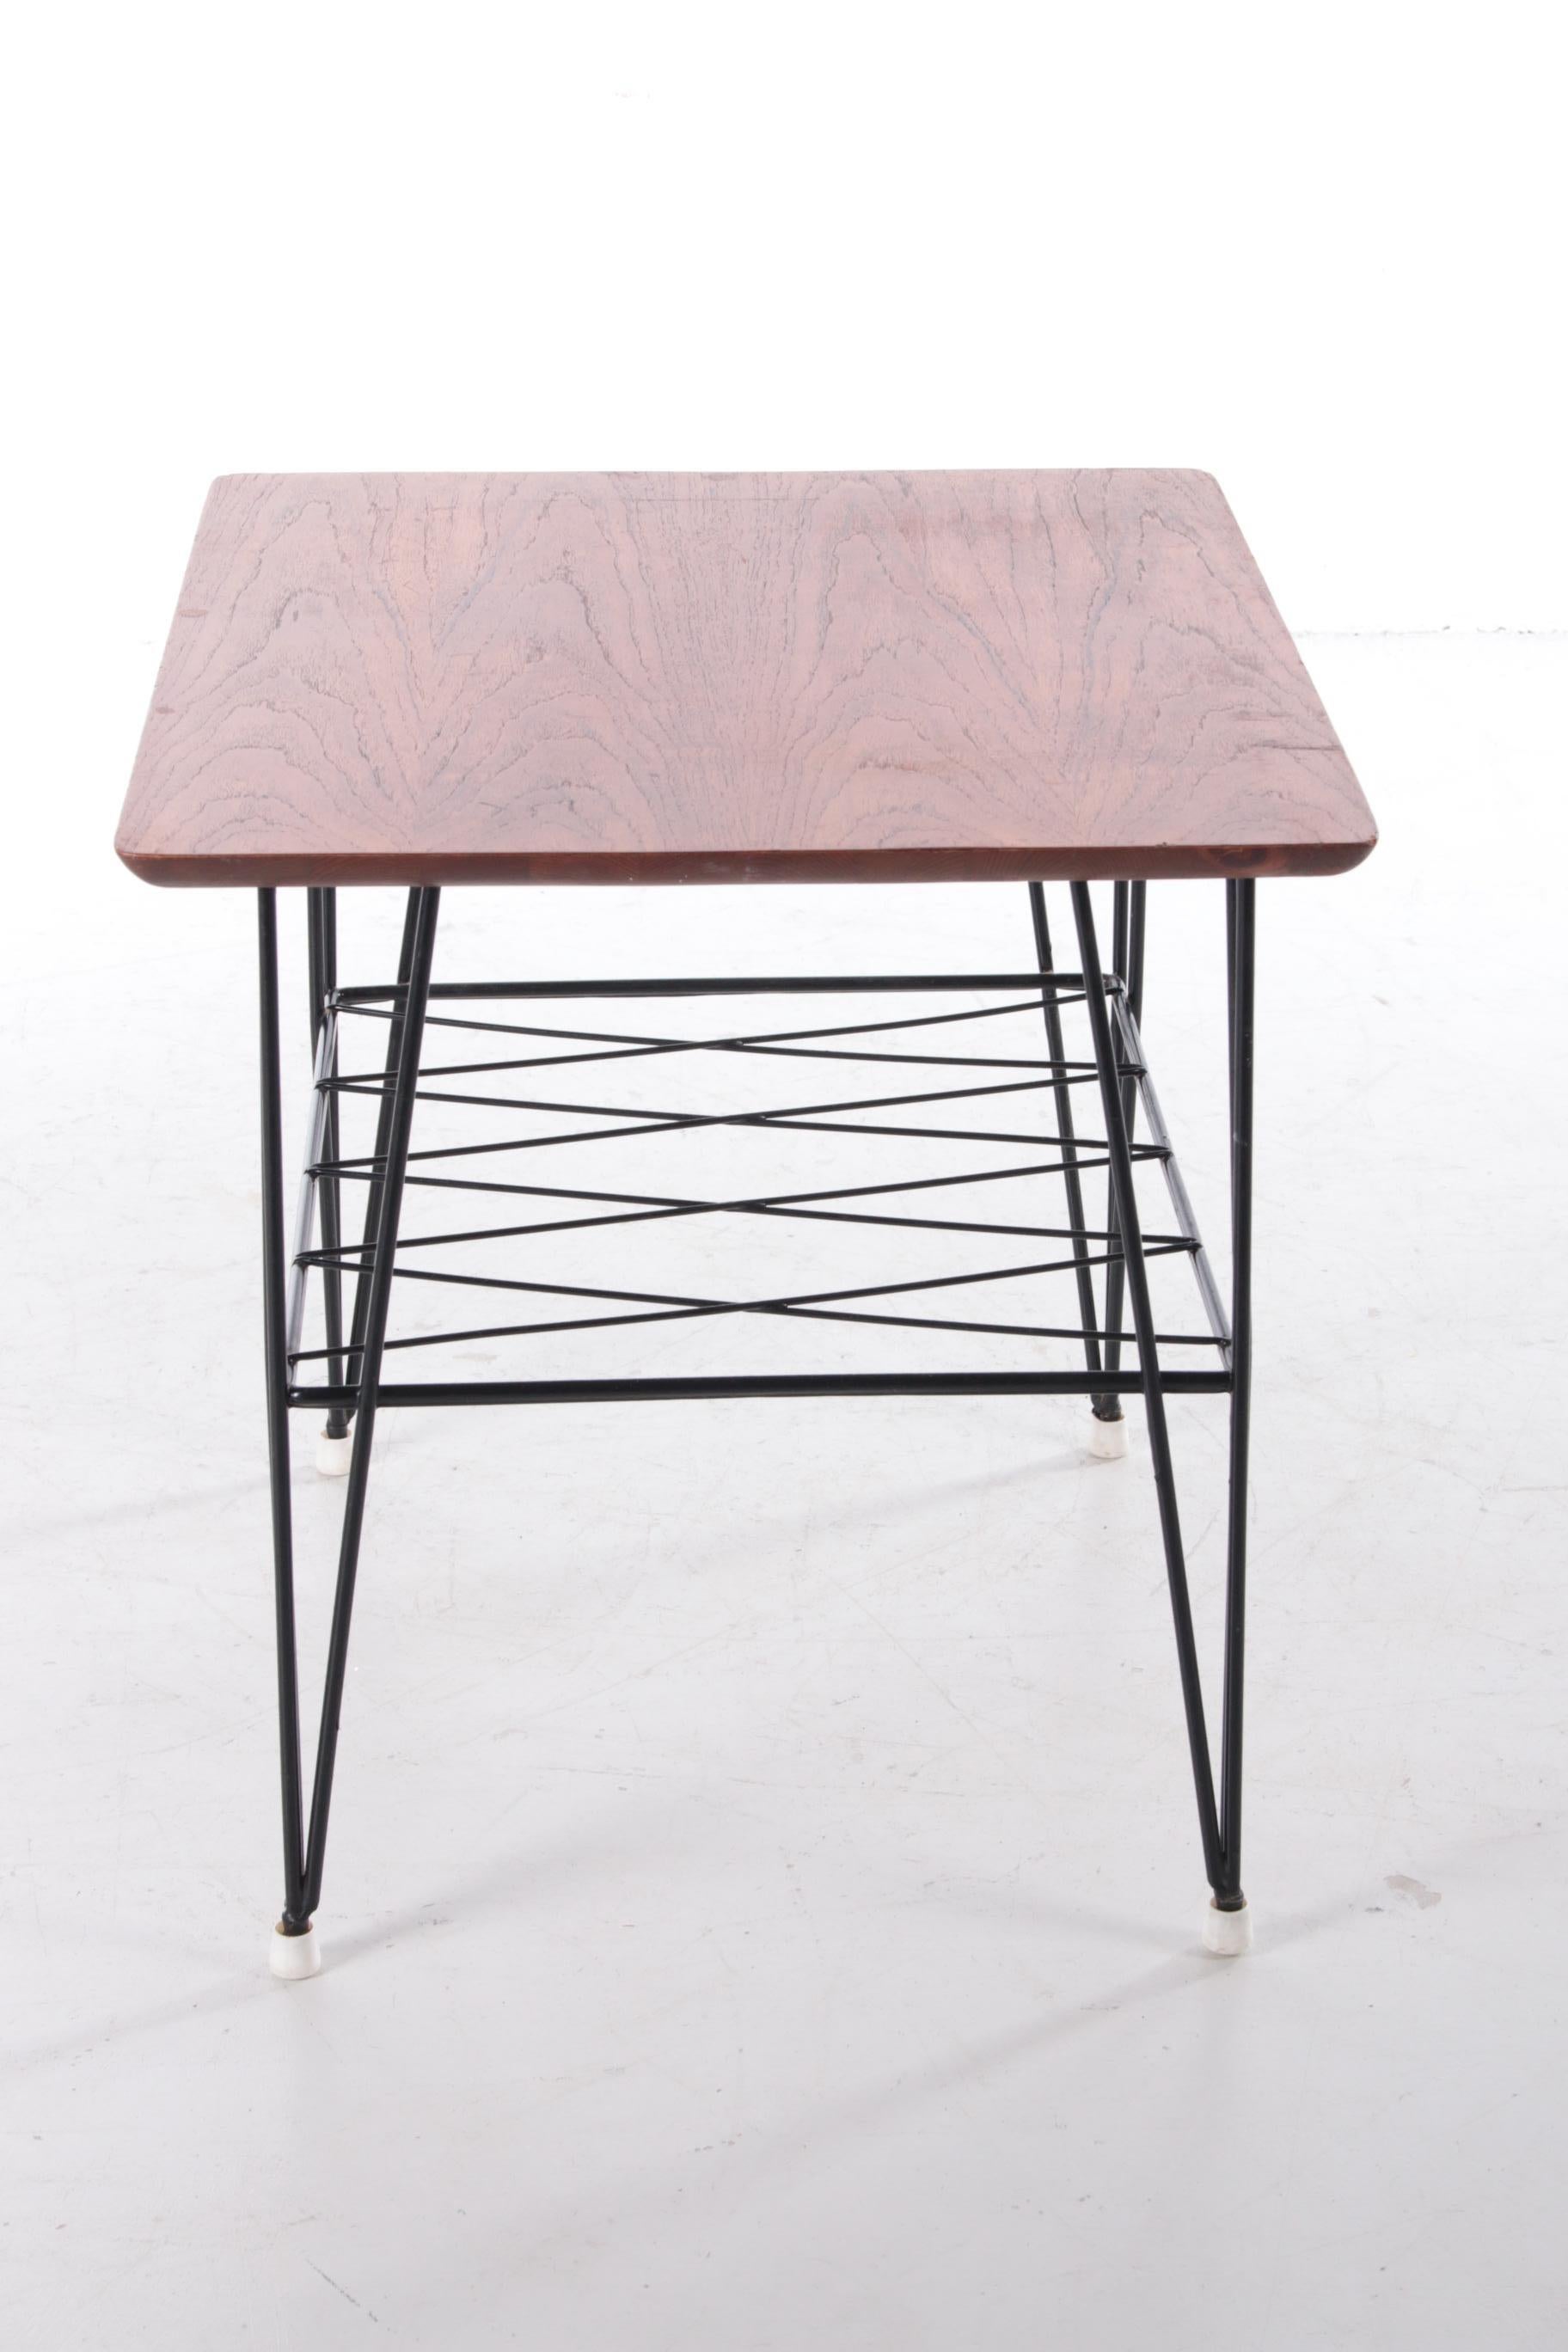 Mid-20th Century Vintage Black Metal String Coffee Table from Sweden, 1960